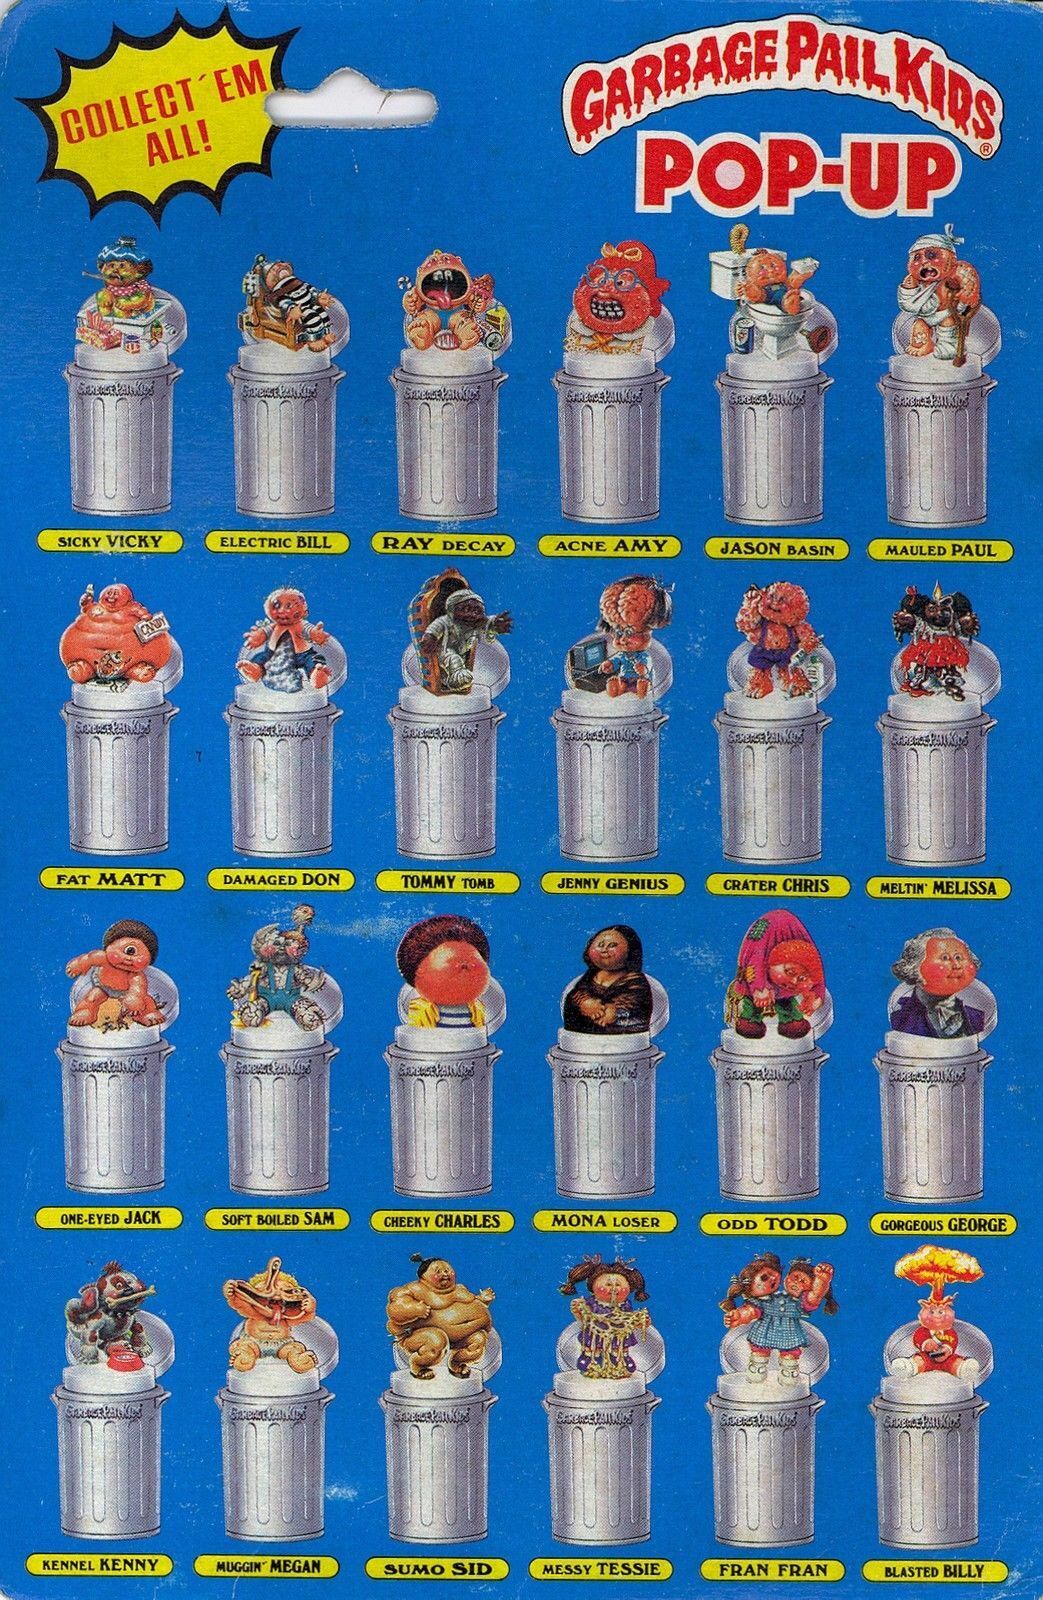 1985 Topps Imperial Toys GARBAGE PAIL KIDS MAULED PAUL Pop-Up GPK Image 2